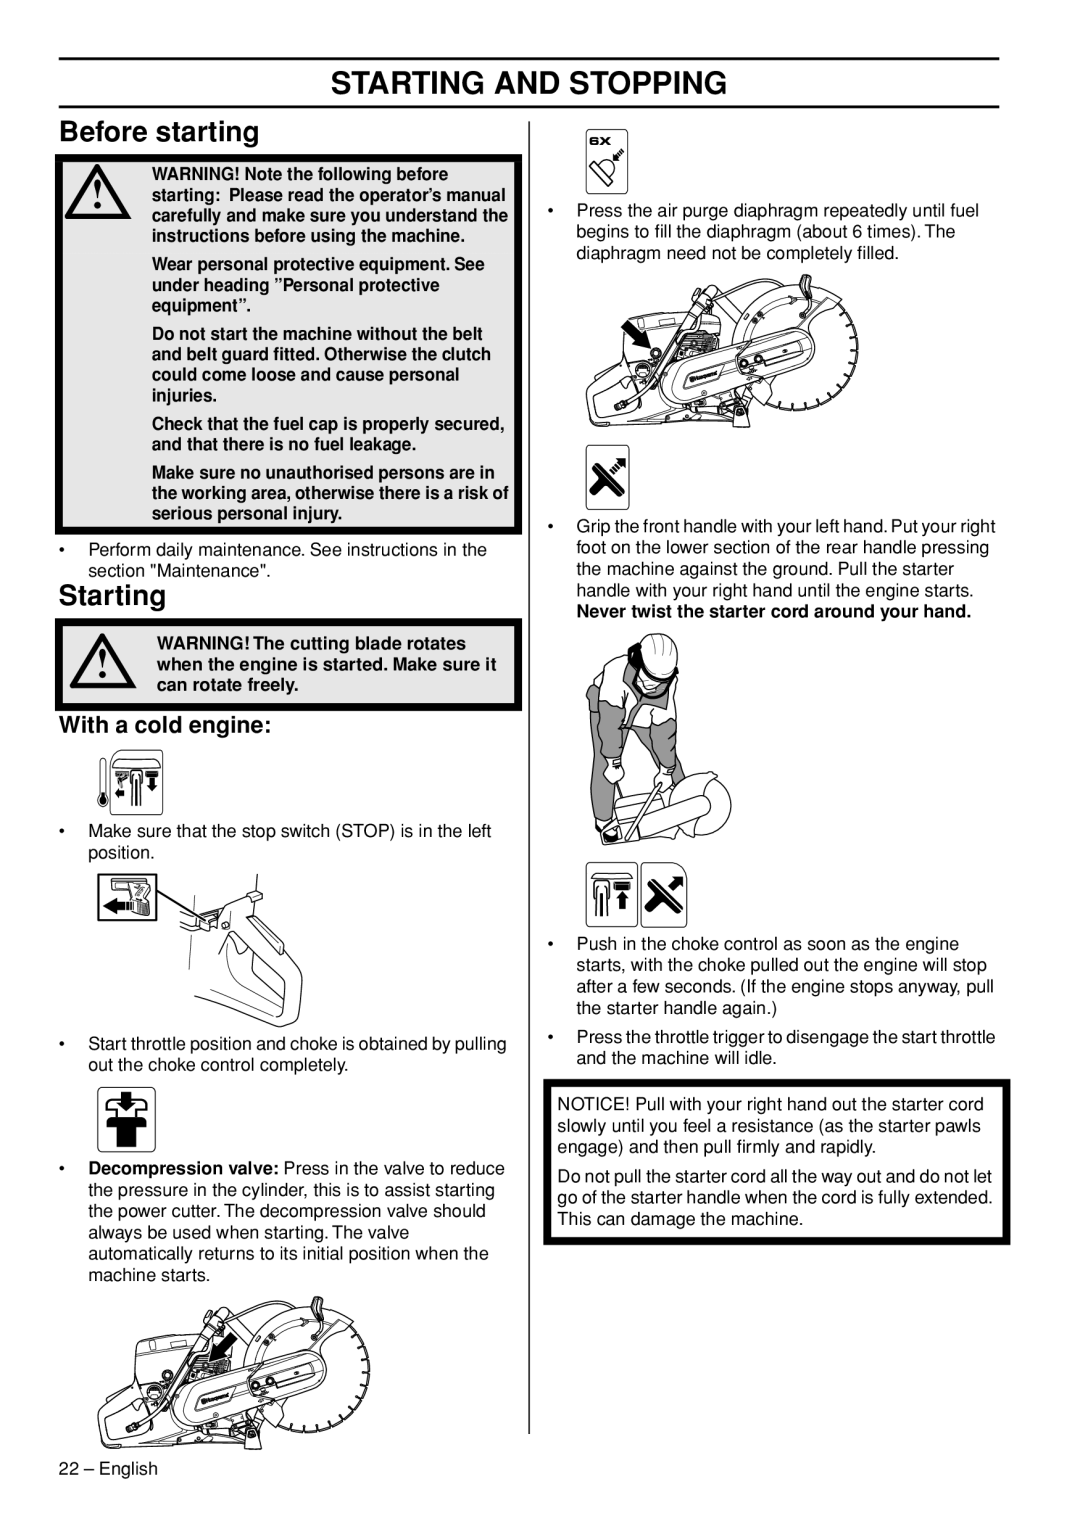 Husqvarna K760 Rescue manual Starting And Stopping, Before starting, With a cold engine 